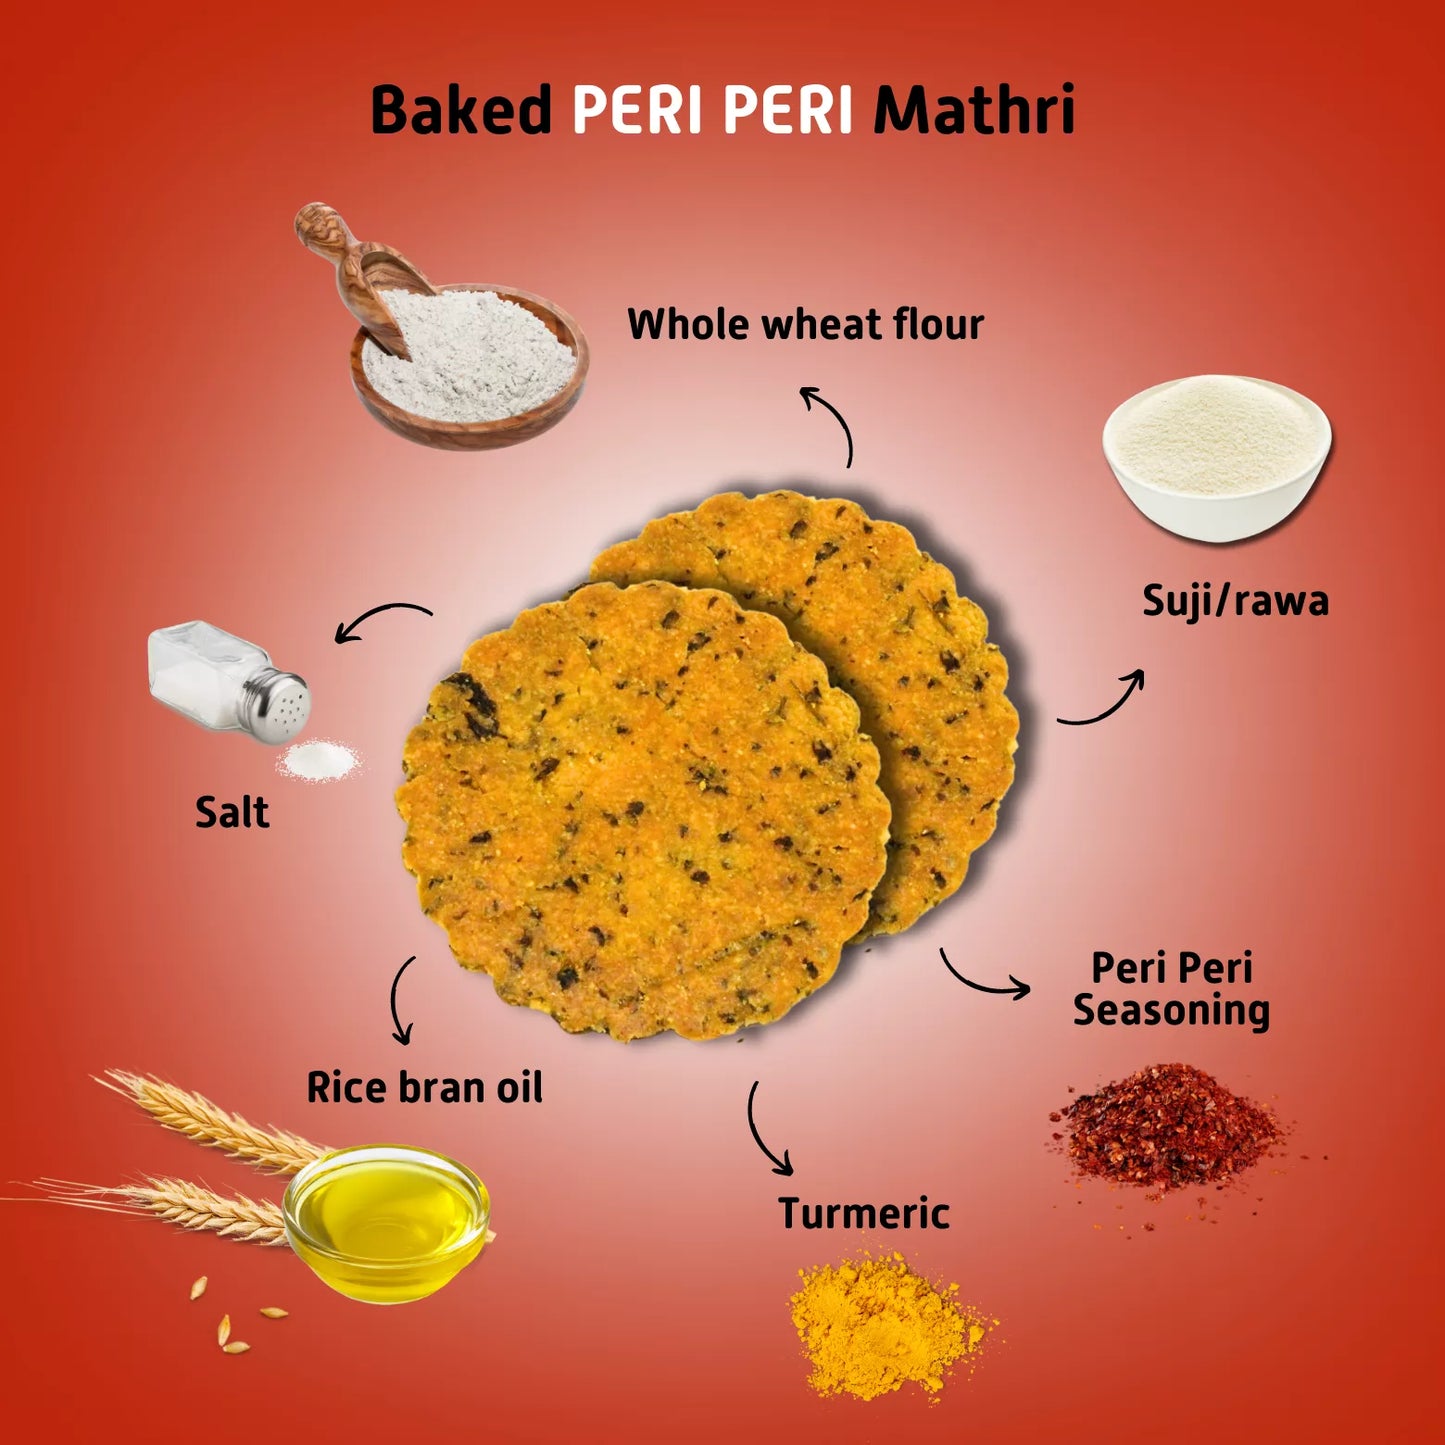 All-in-One Baked Mathri Combo